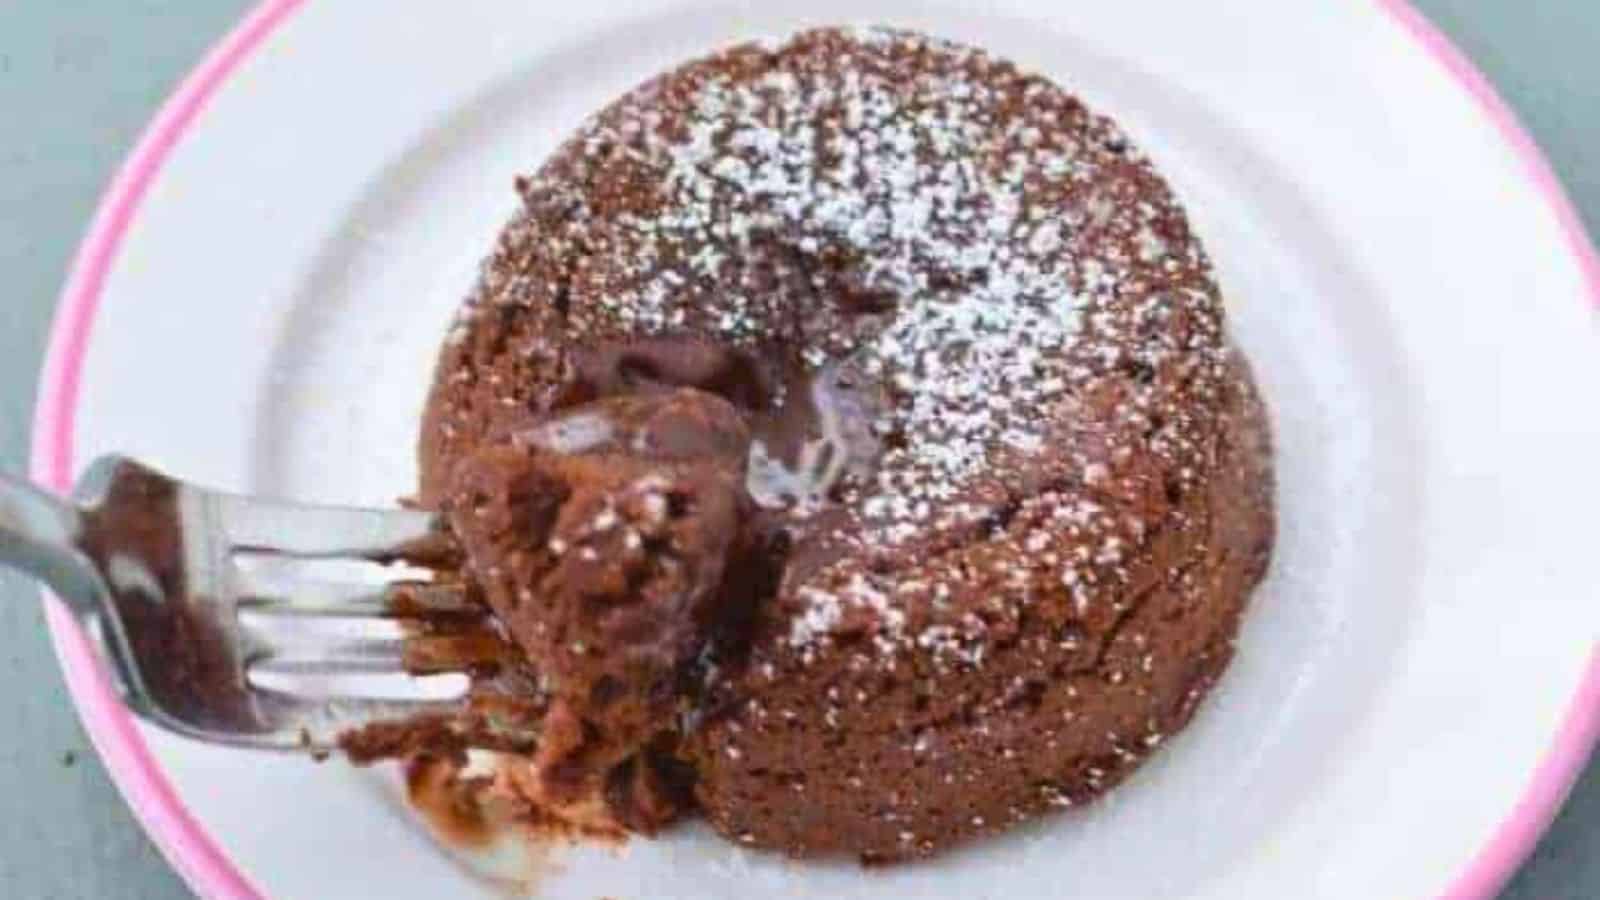 Image shows a fork pulling a bite from a molten chocolate cake on a white plate.